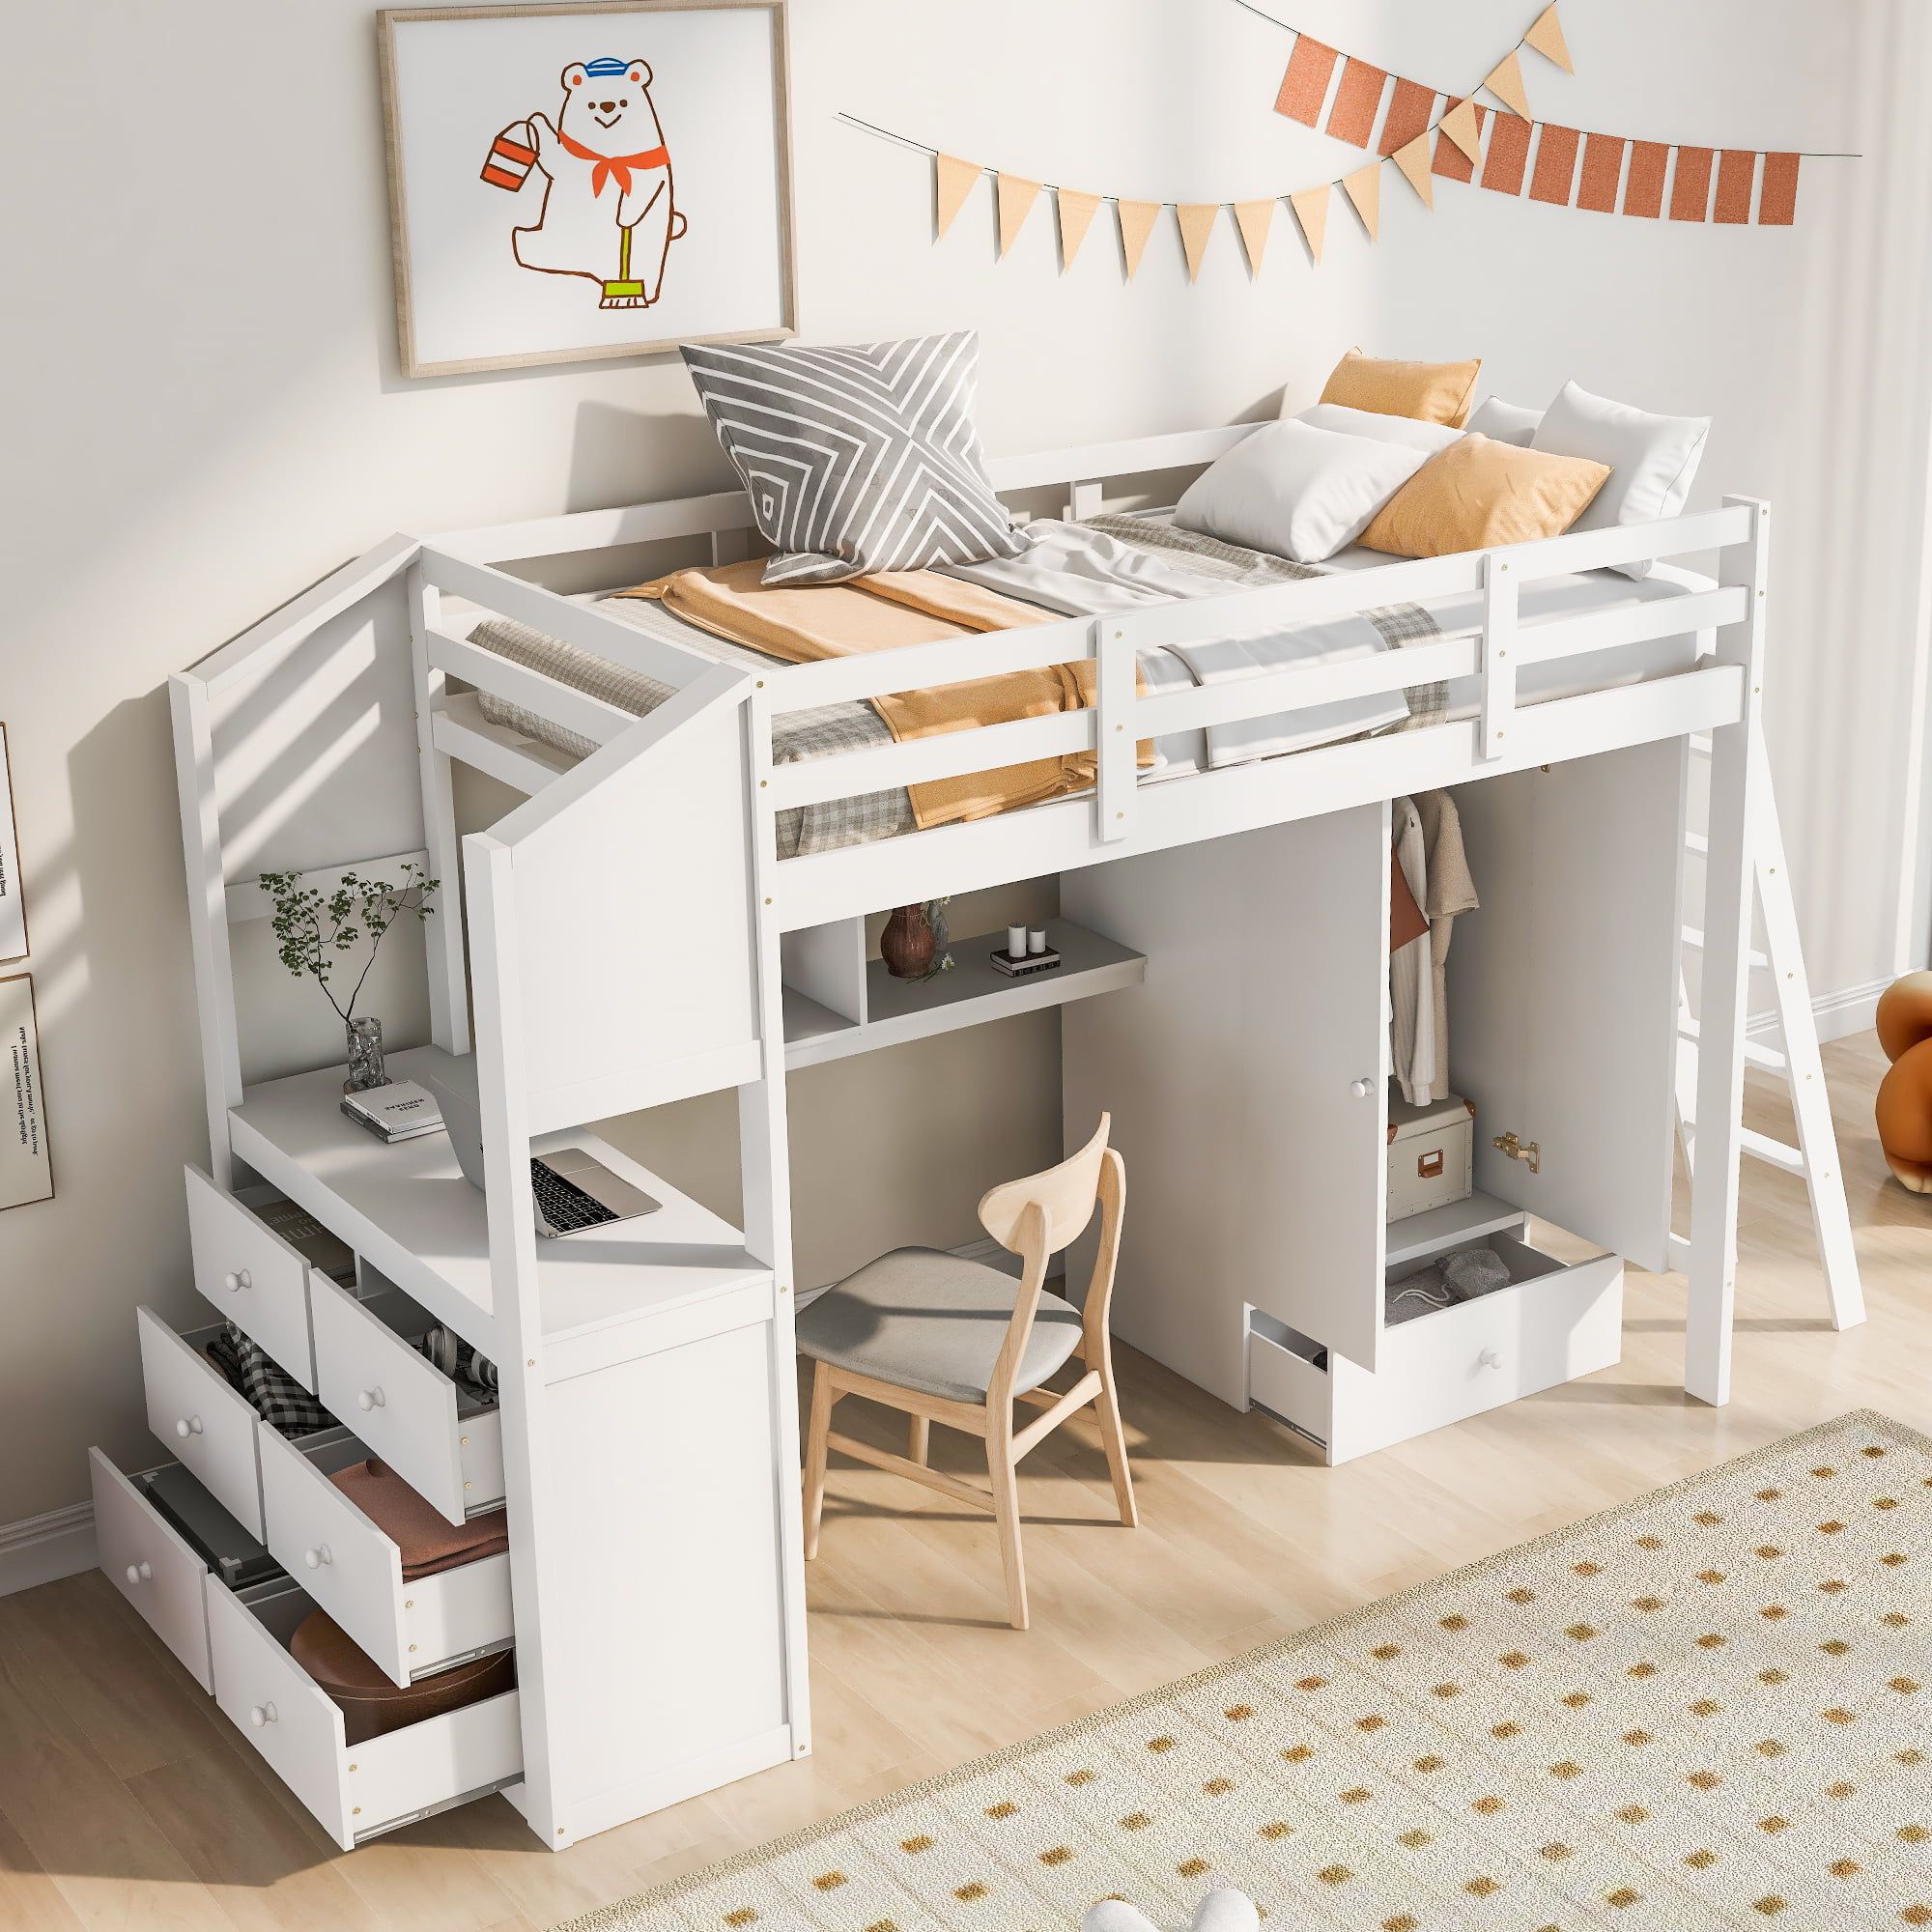 Twin Size Loft Bed With Wardrobe And Drawers, Attached Desk With Shelves –  Cool Toddler Beds Intended For High Sleeper Bed With Wardrobes (View 18 of 20)